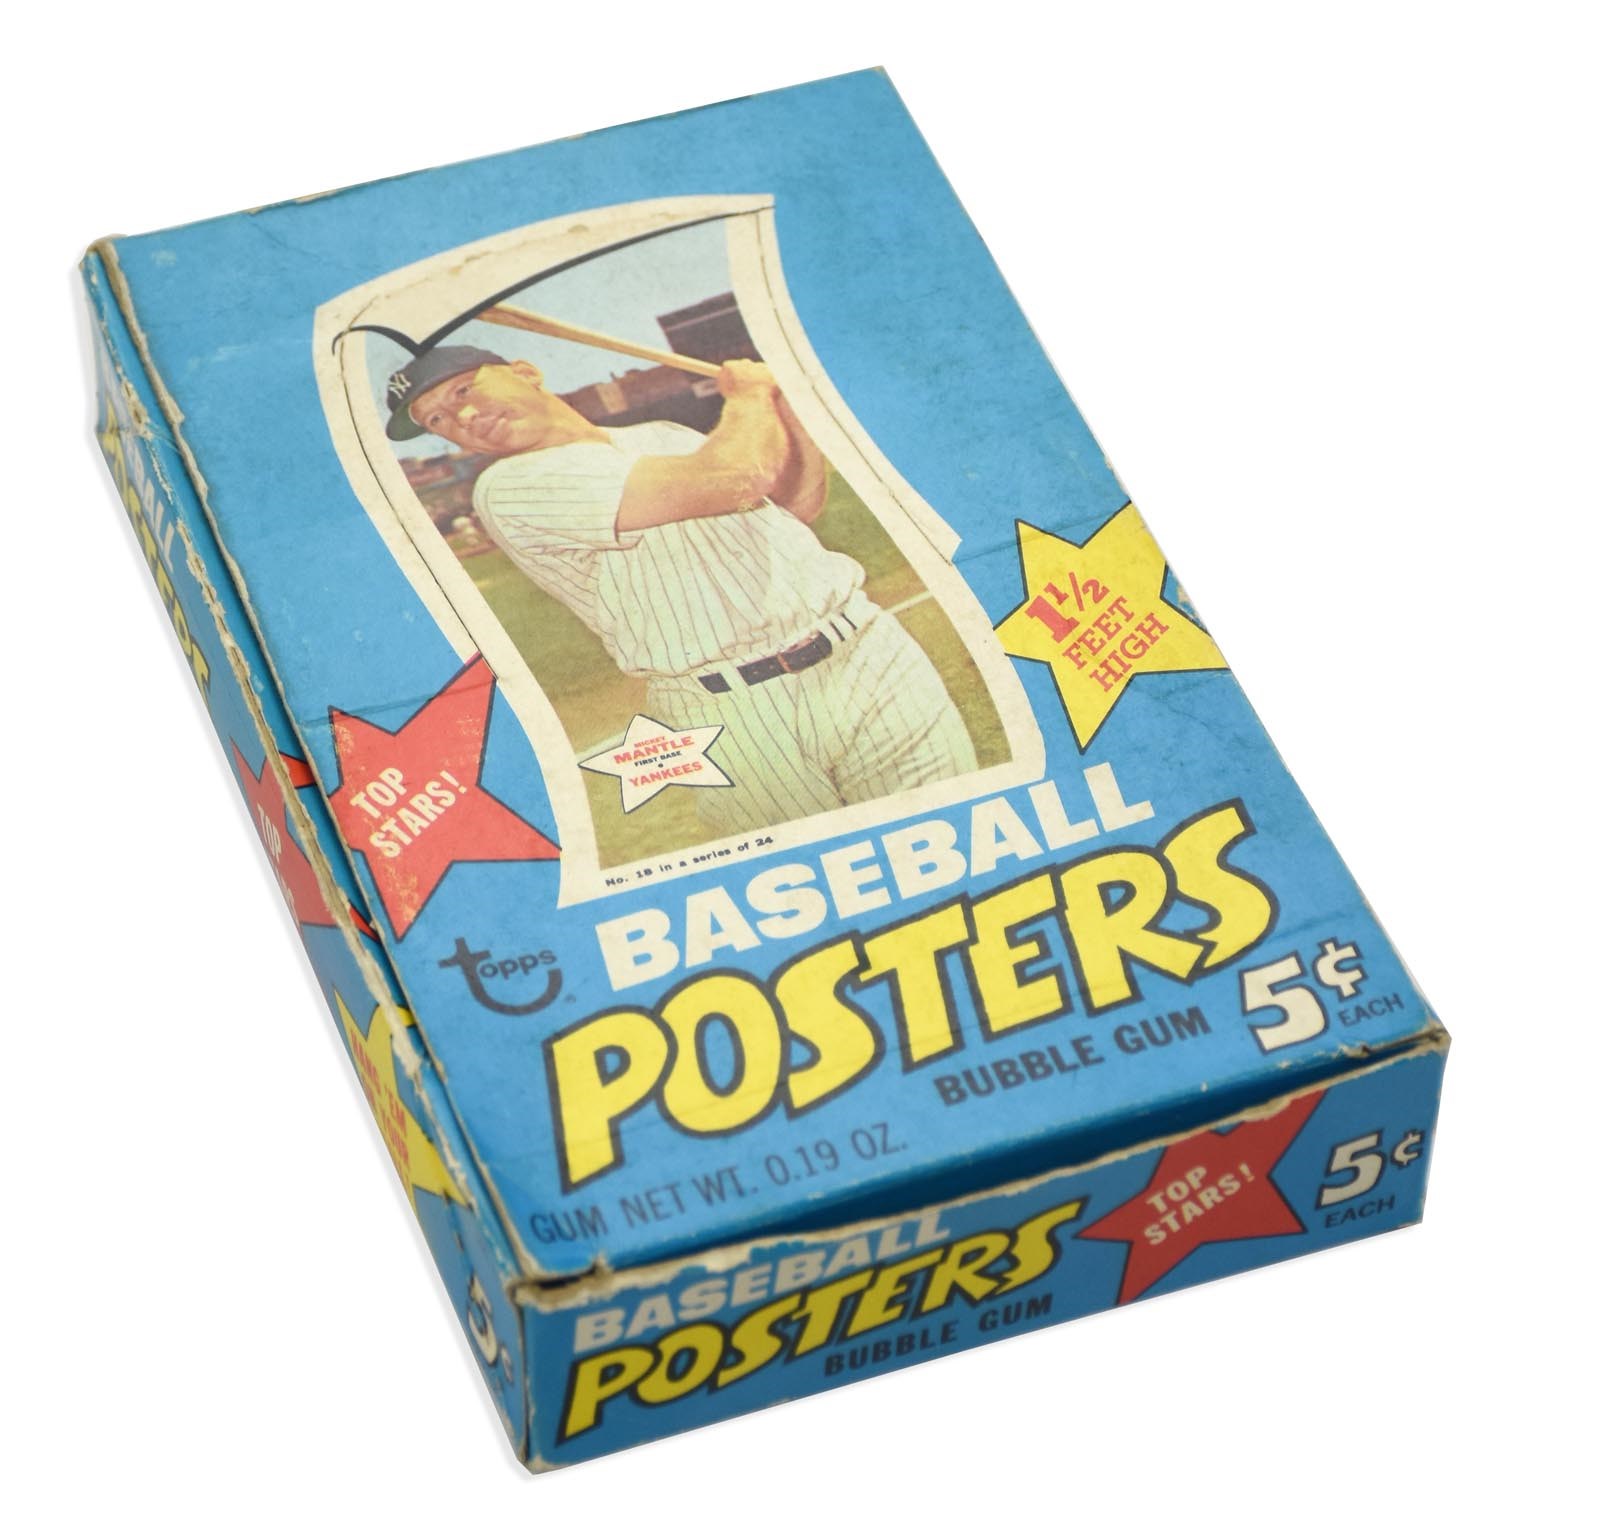 1967 Topps Baseball Posters Wax Box with Mickey Mantle